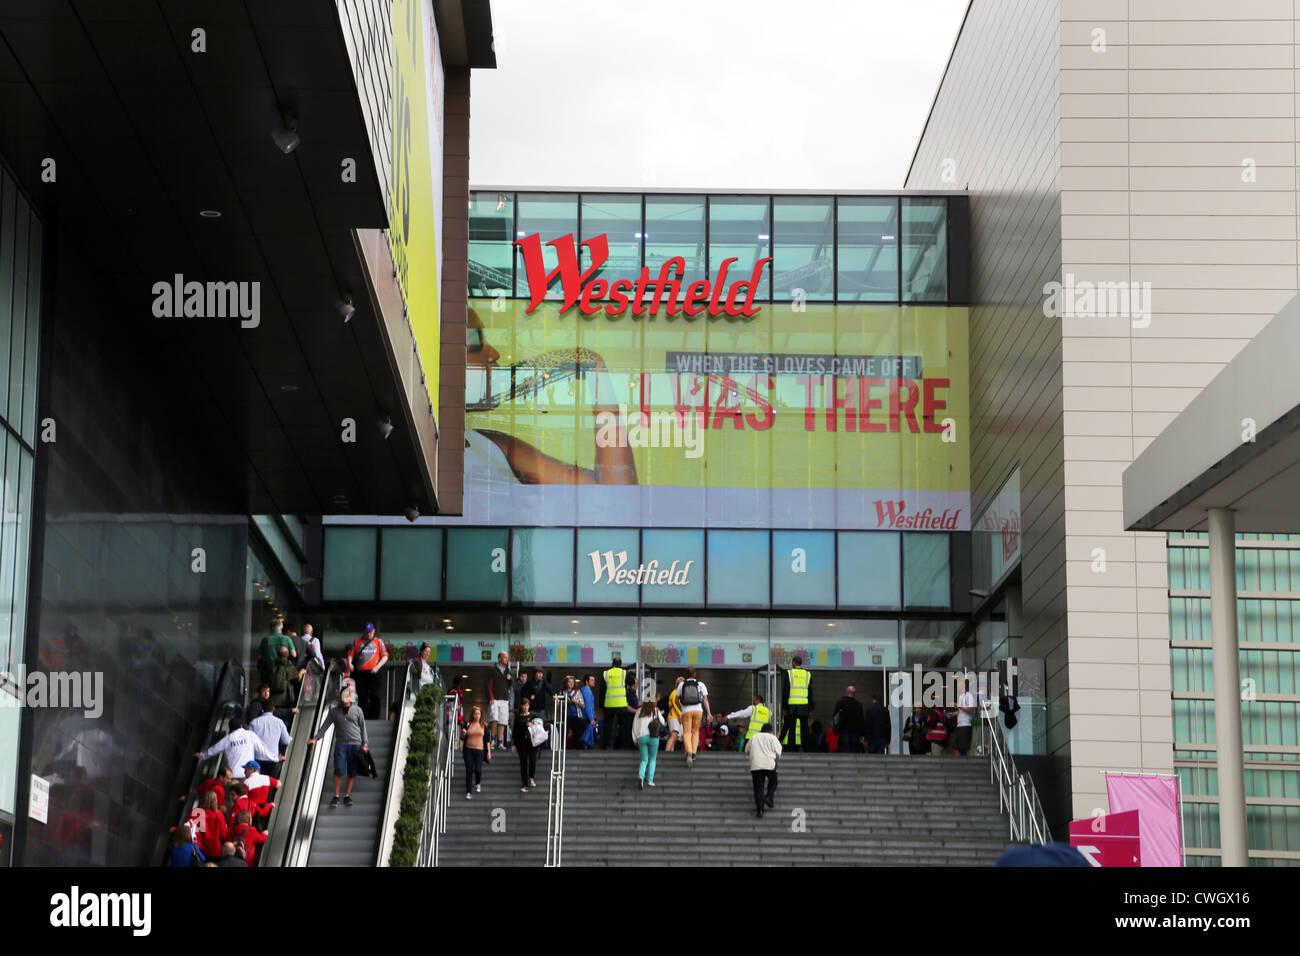 stratford London England Entrance To Westfield Shopping Centre Crowds Of People Stock Photo